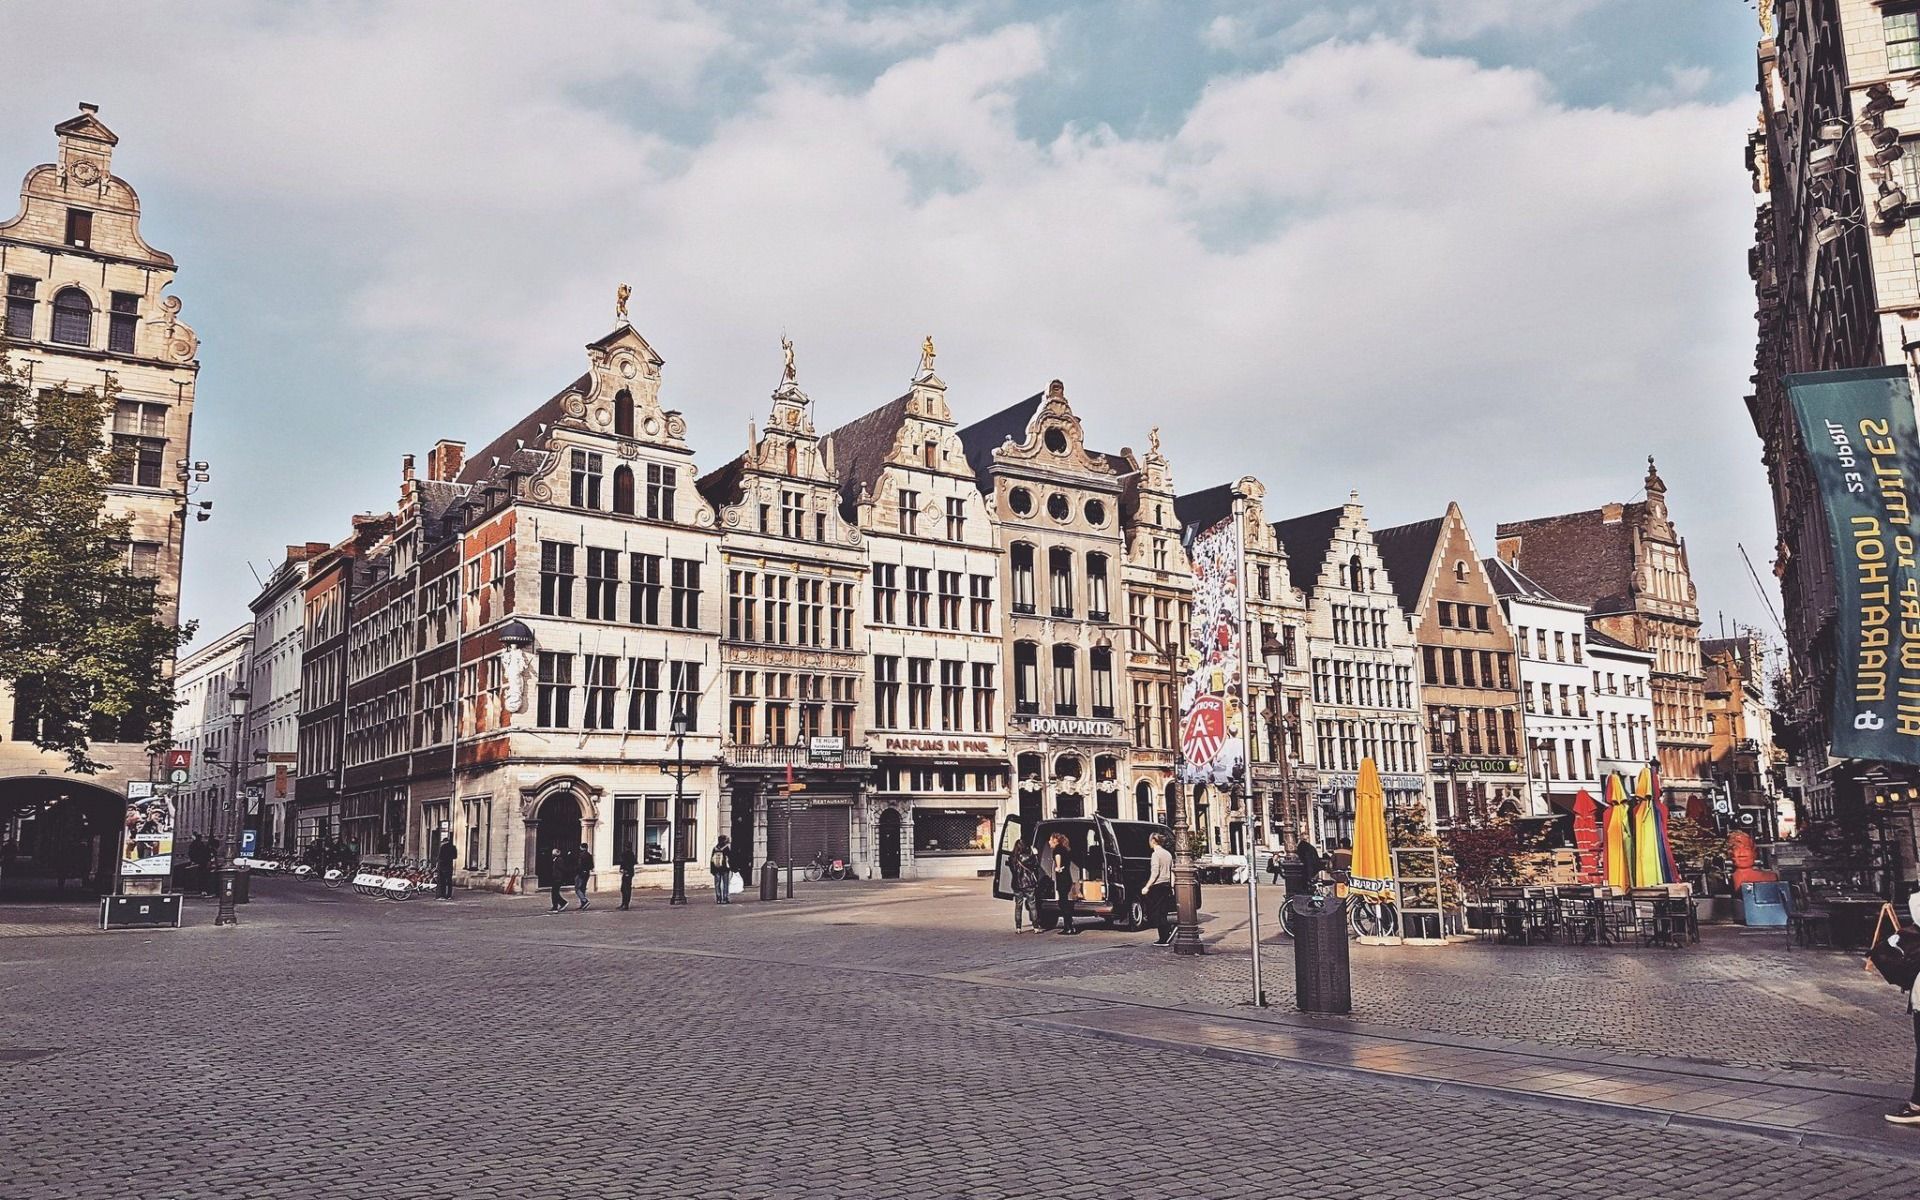 Download wallpaper Antwerp, square, old houses, old architecture